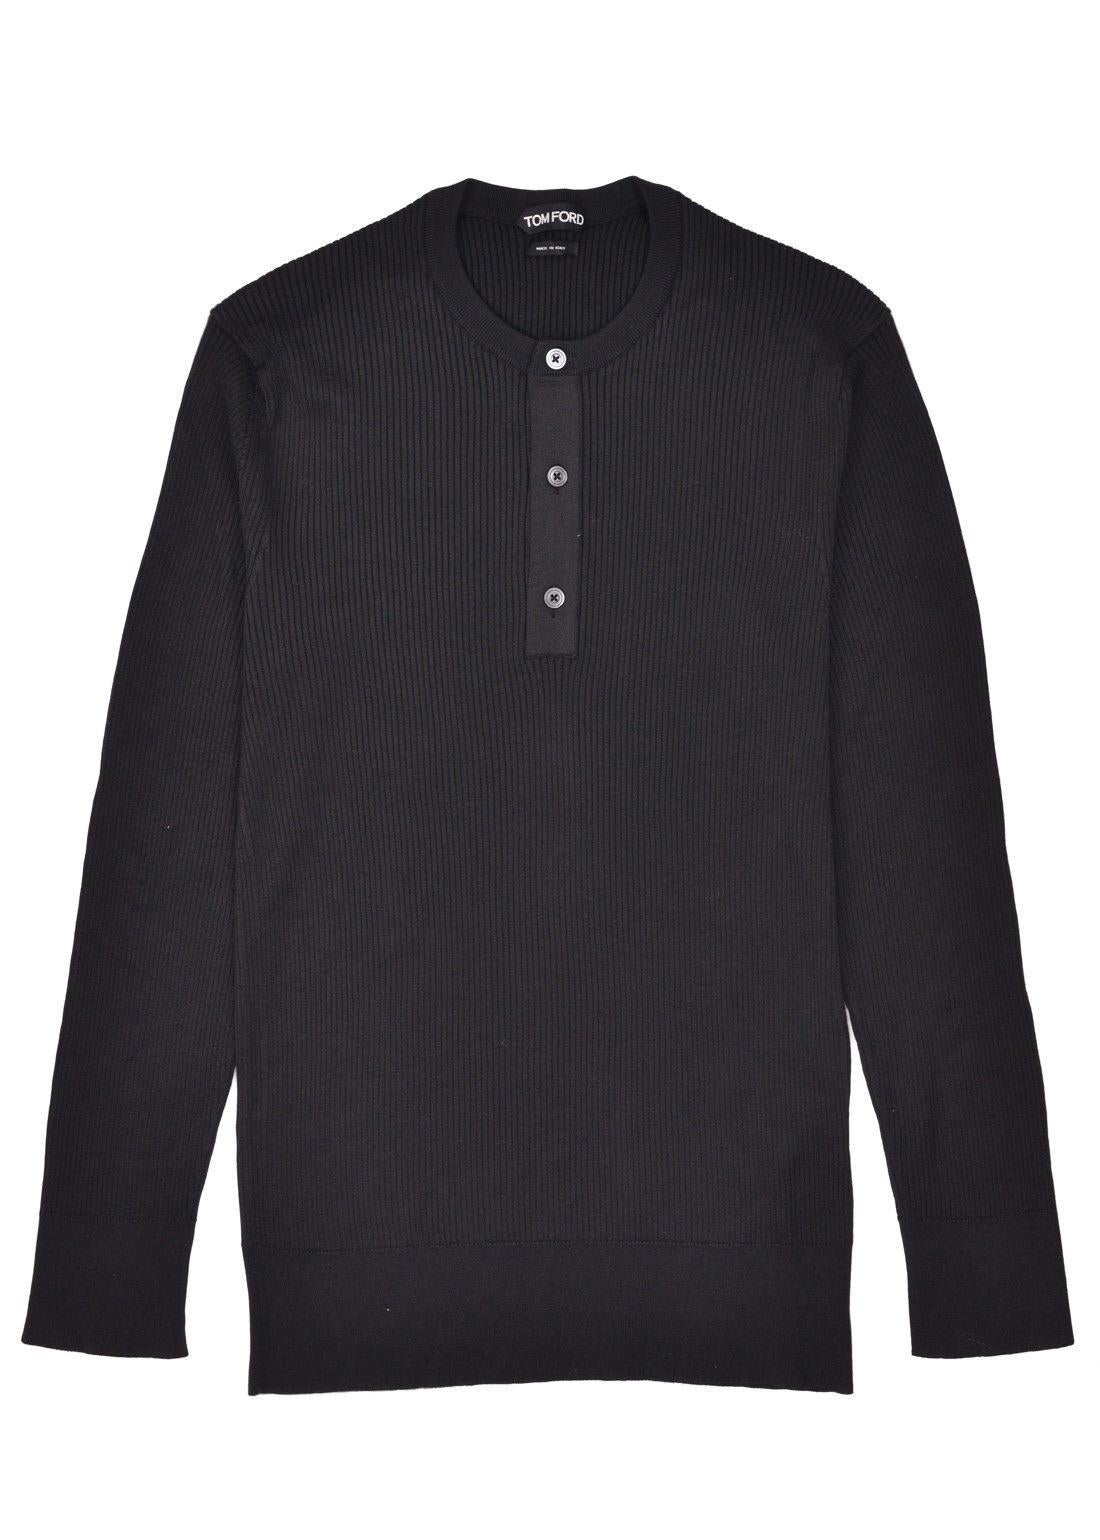 Men's Tom Ford Mens Black Cashmere Blend Henley Ribbed Sweater Size IT52/US42~RTL$1710 For Sale